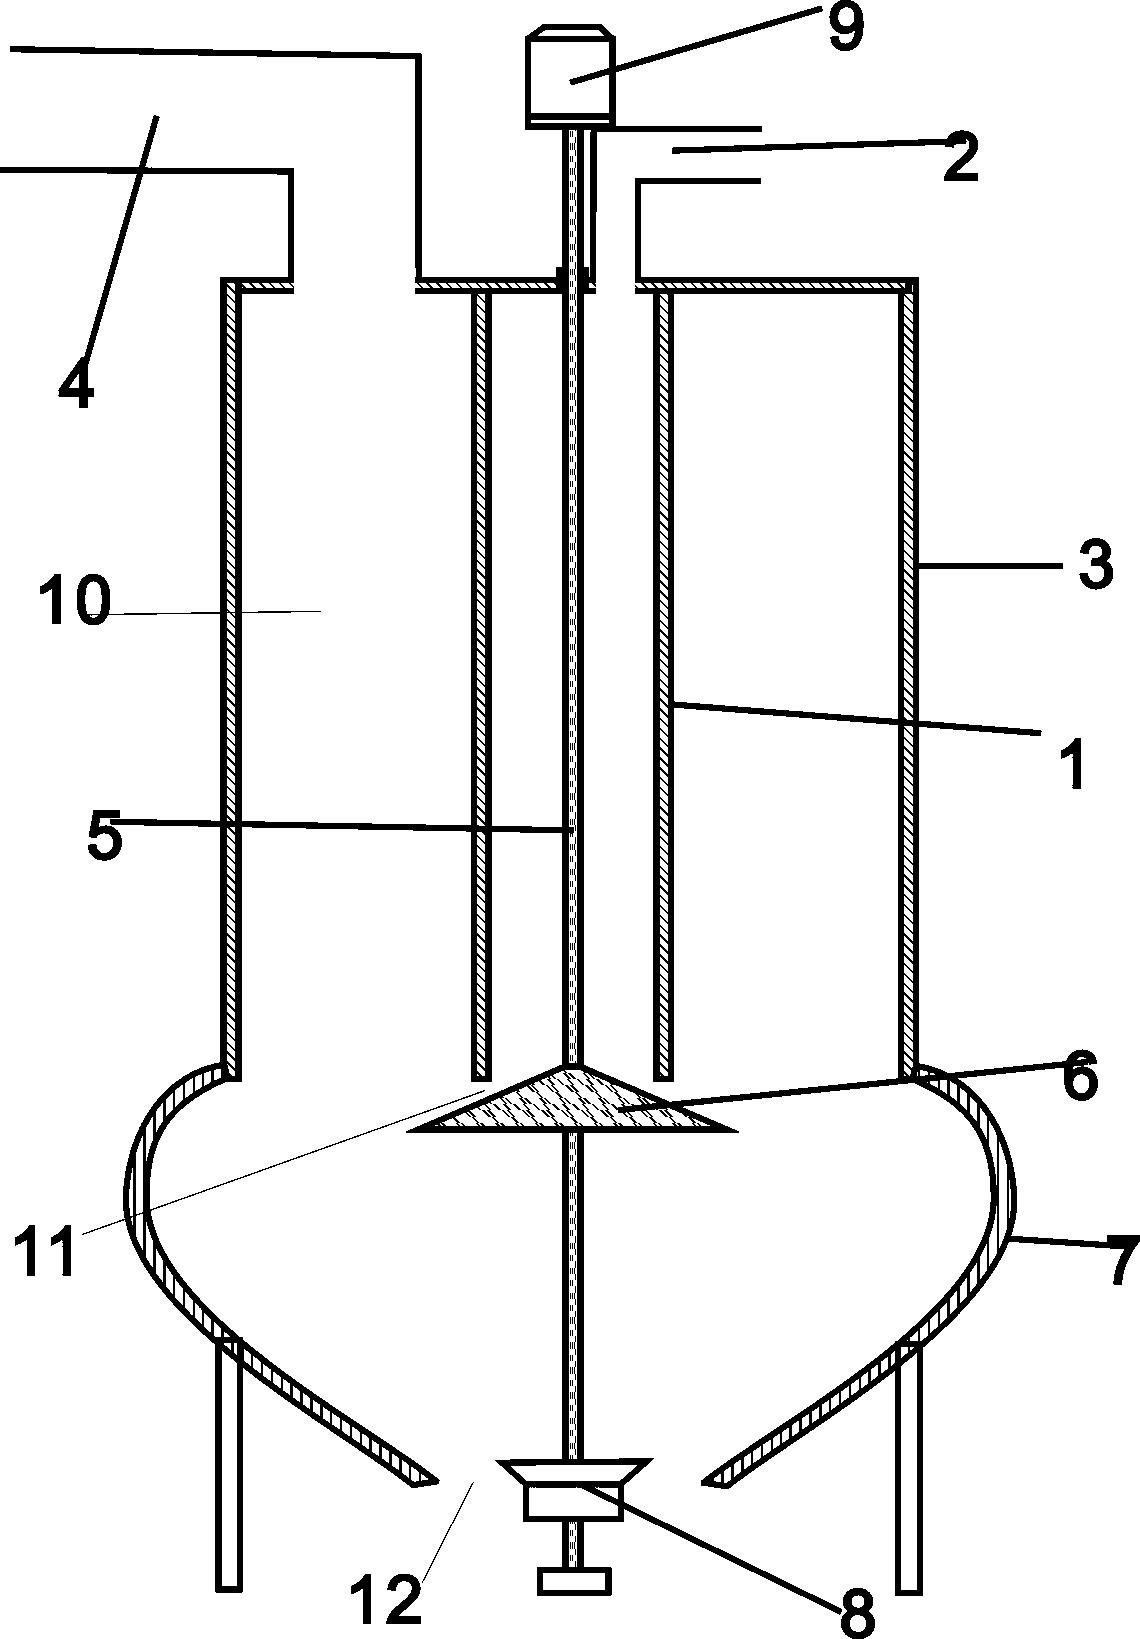 Linseed husk and kernel separation device